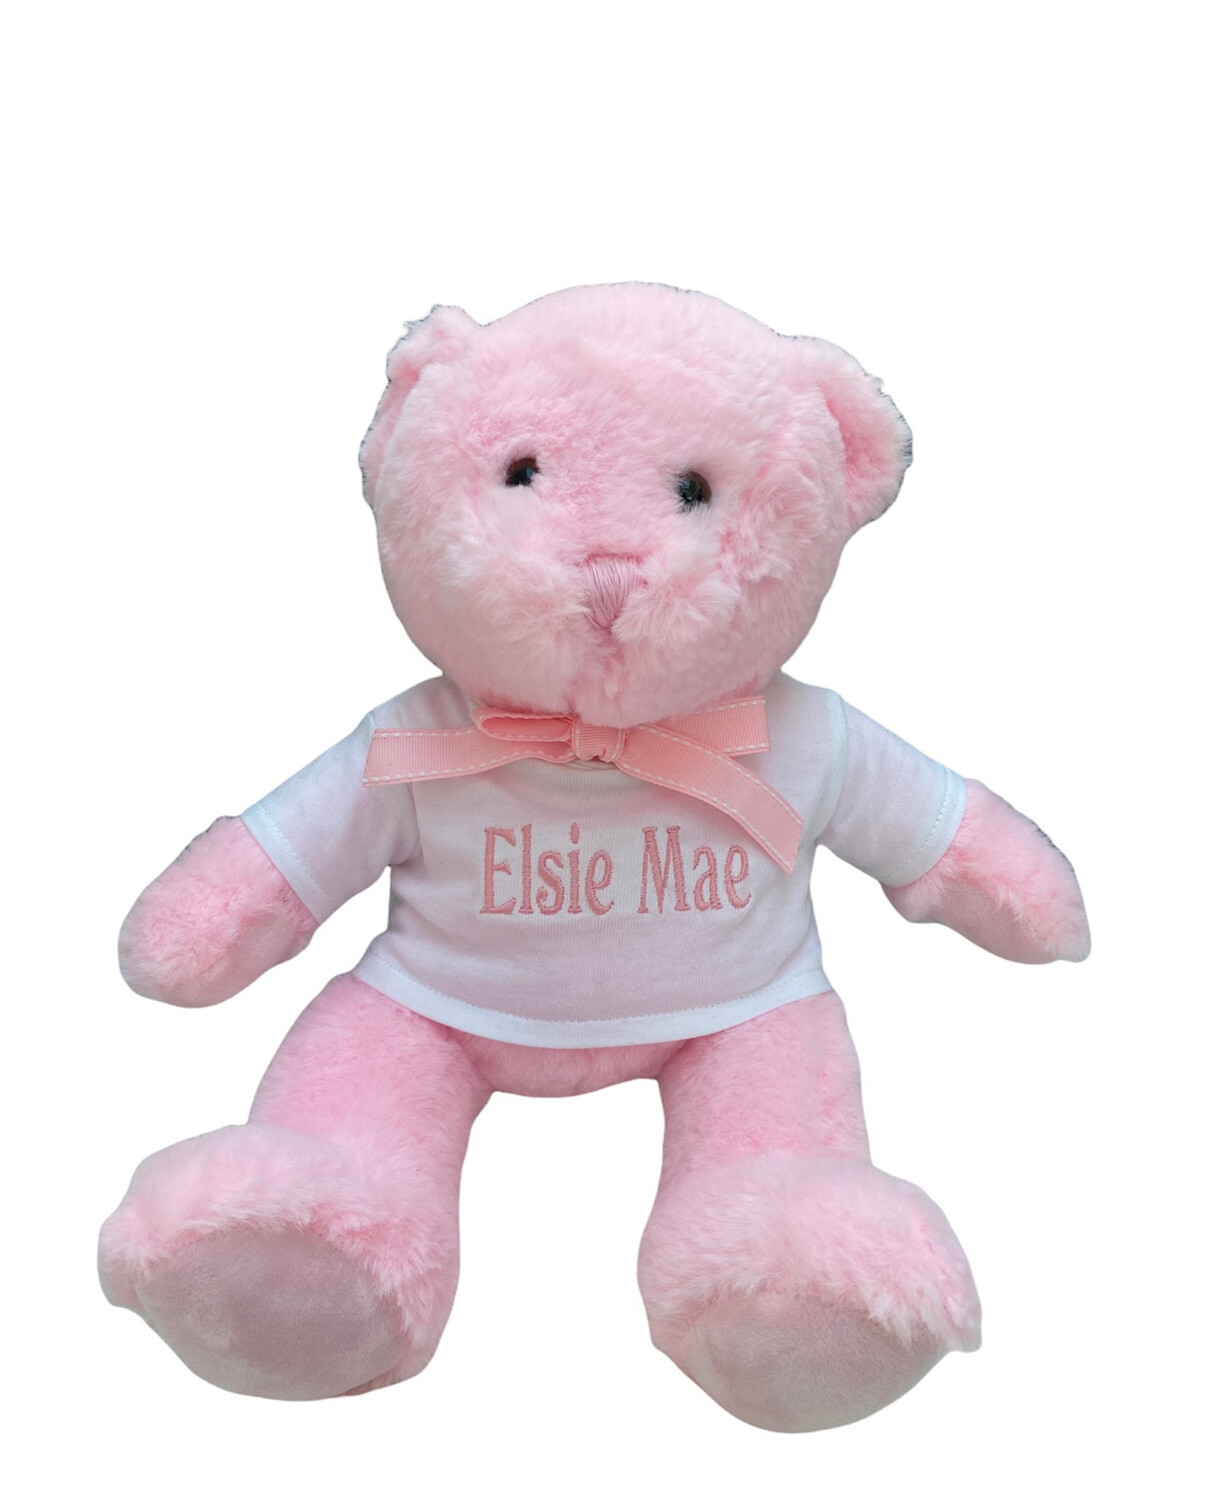 Small pink teddy bear with spot ribbon